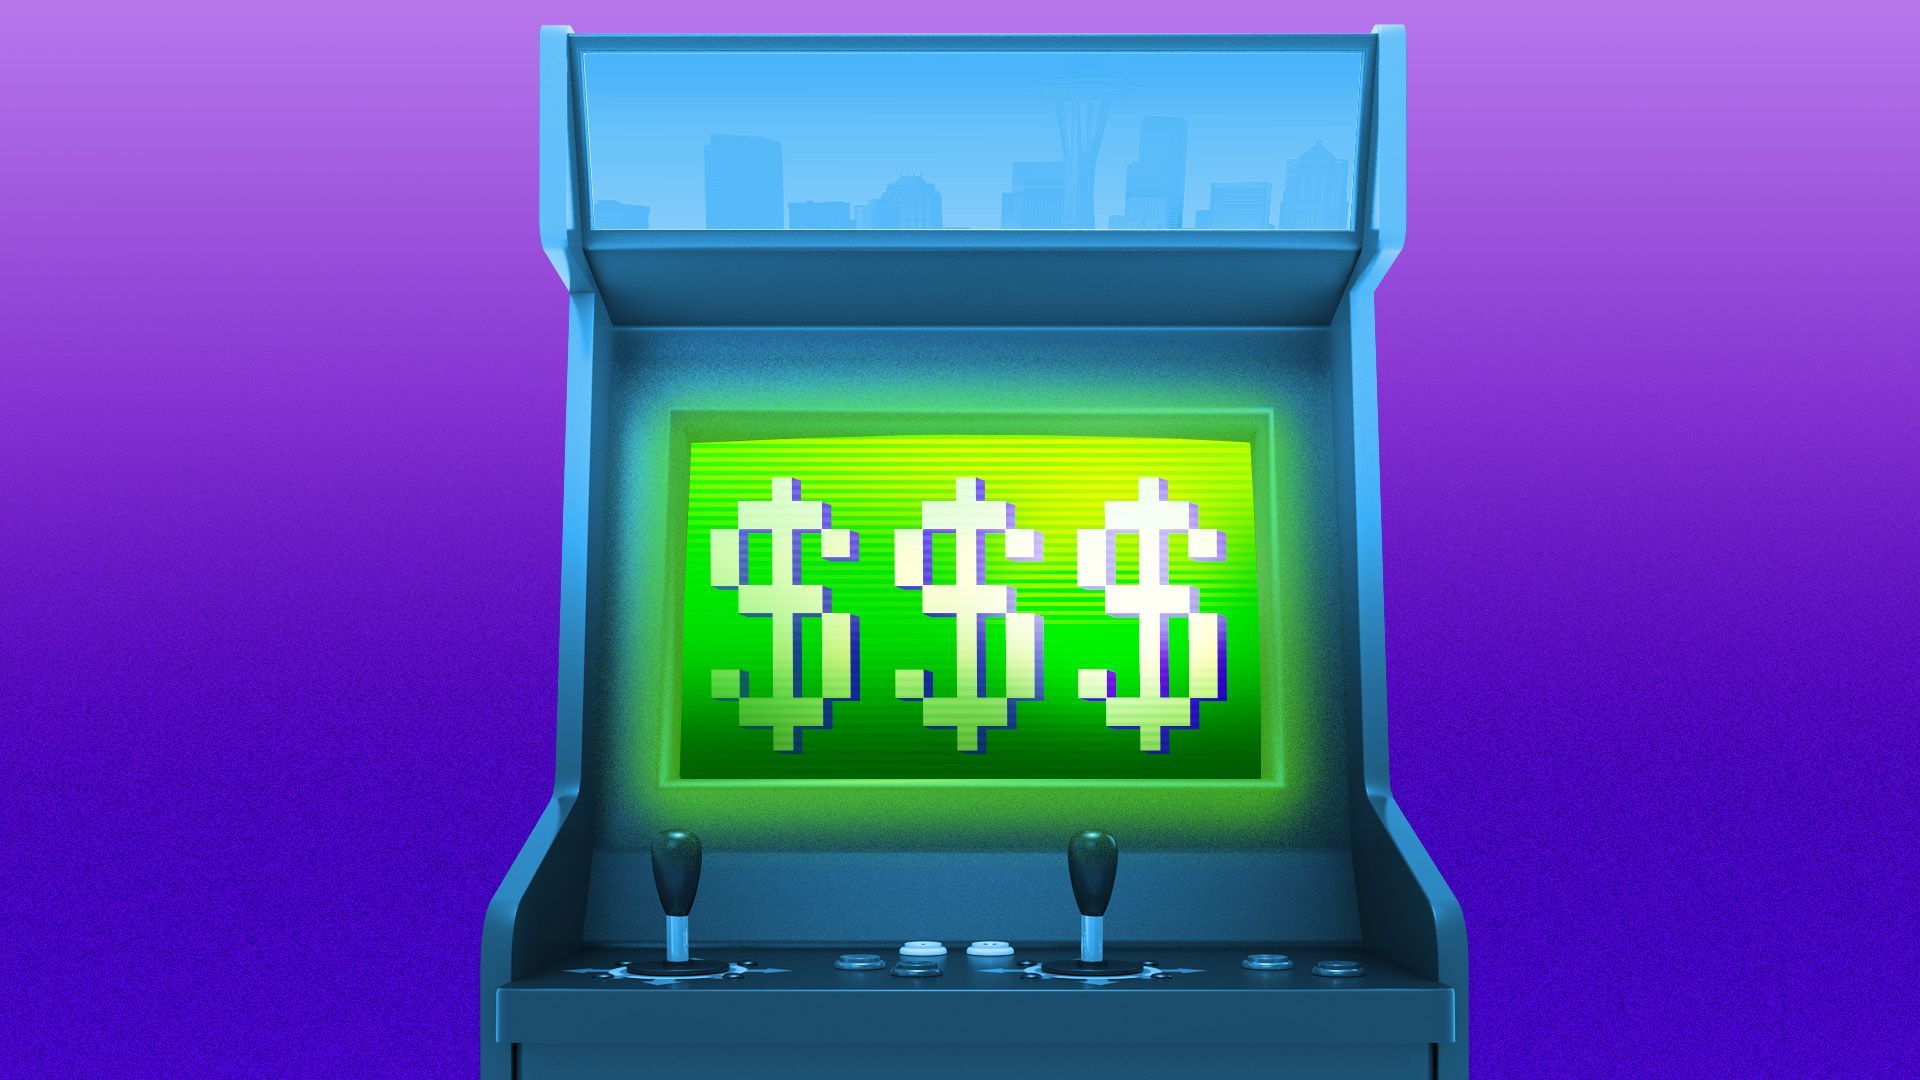 Illustration of an old arcade game with three dollar signs on the screen